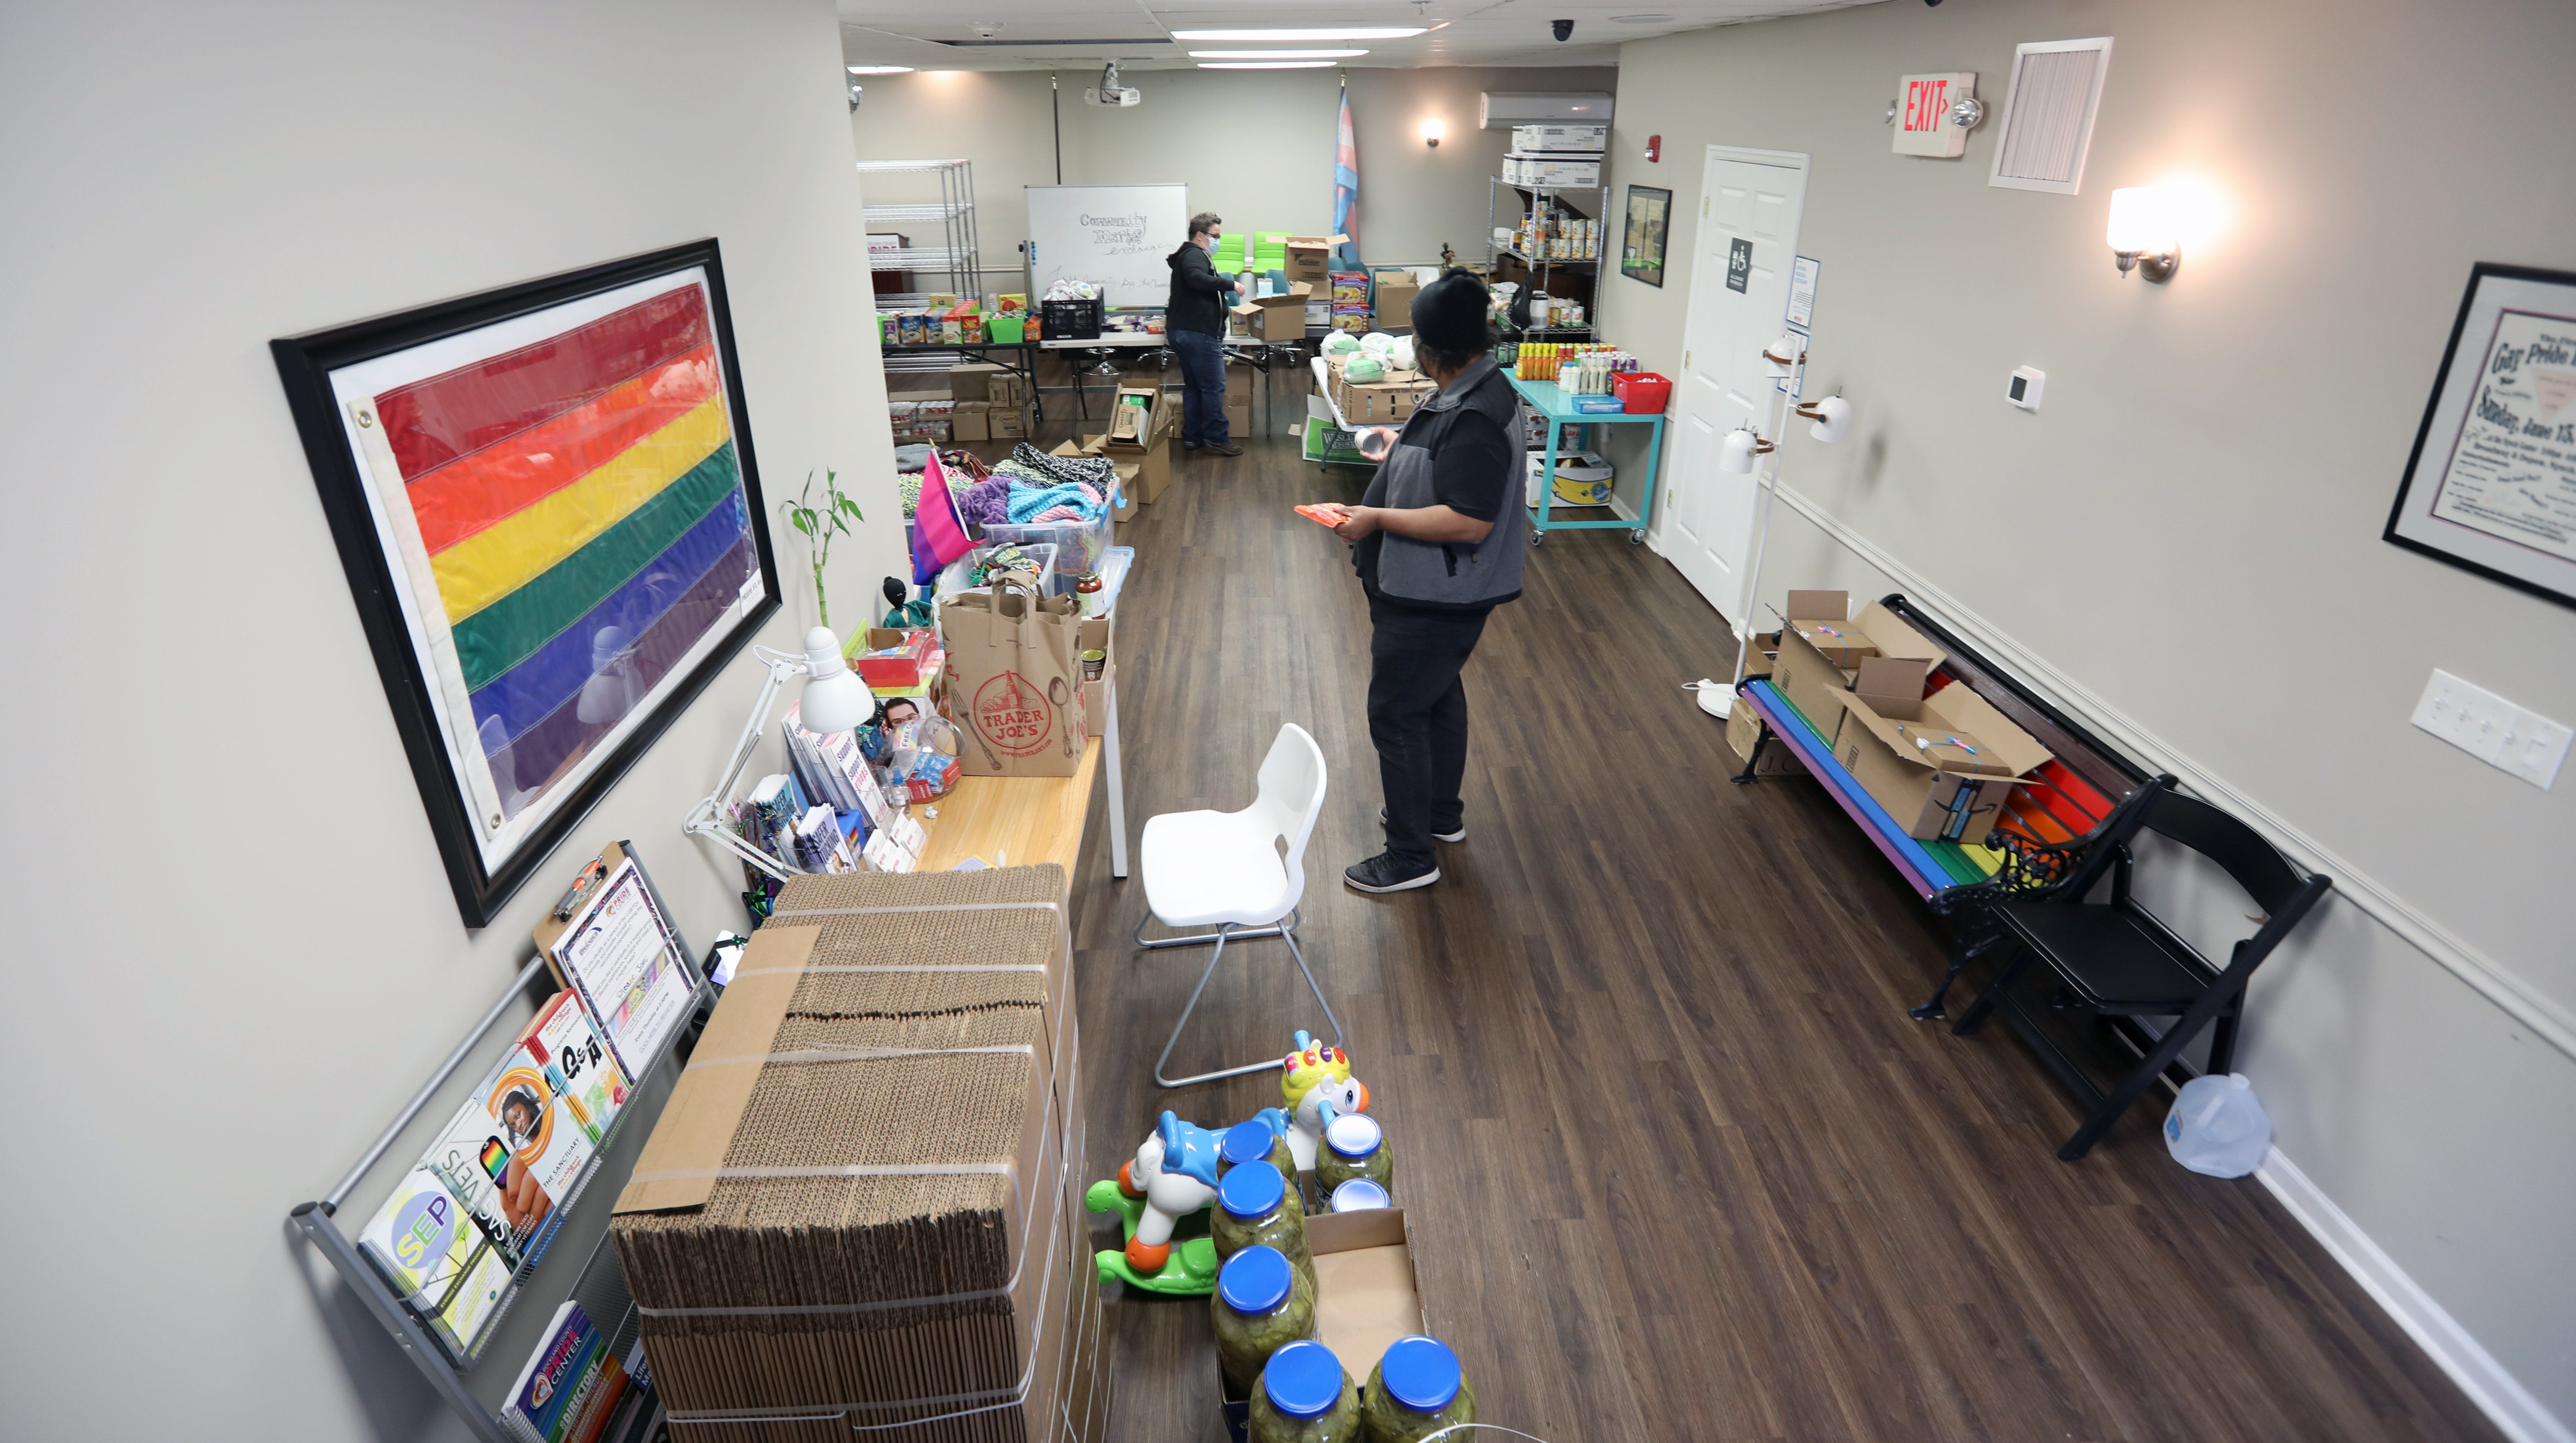 Hudson Valley municipalities, including Rockland, Ulster and Westchester counties and New Rochelle, have set aside millions in ARPA funding for grants to a combination of small businesses, religious organizations and nonprofits, such as the food pantry at the Rockland Pride Center in Nyack.